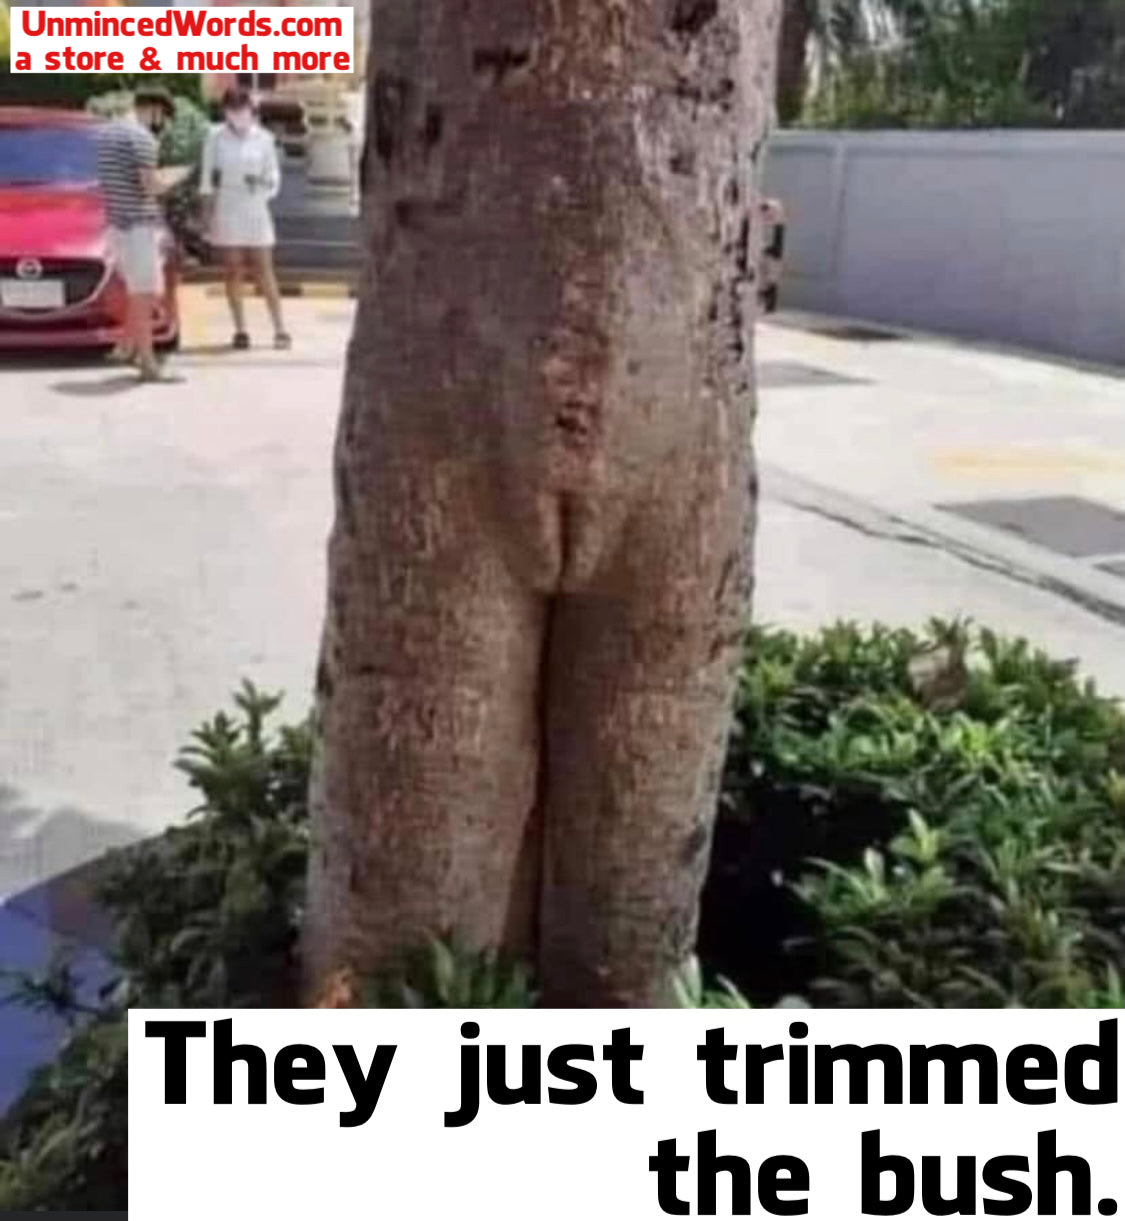 They just trimmed the bush.